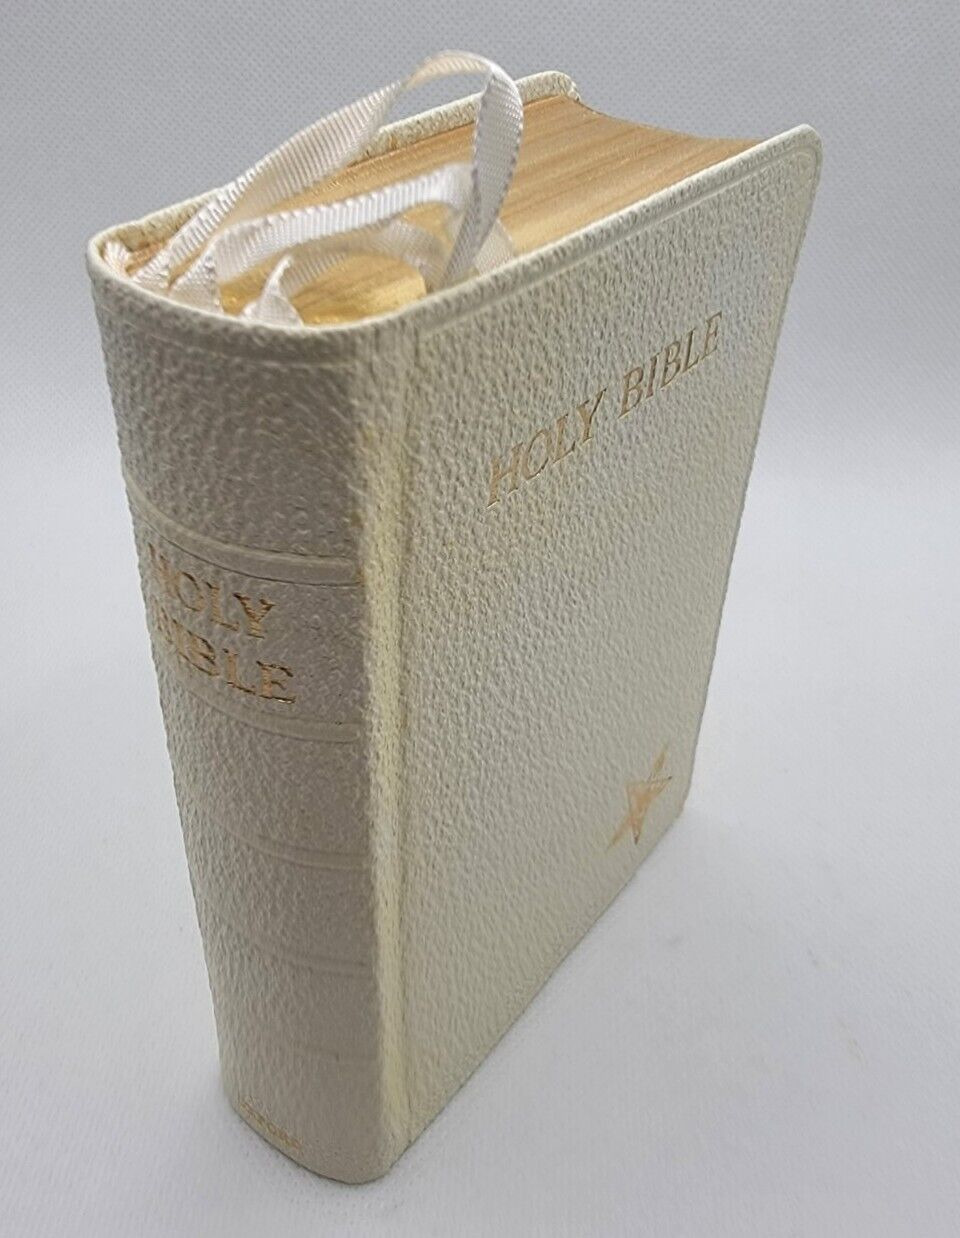 1935 Masonic Order of the Eastern Star Oxford Small Pocket Purse Bible White